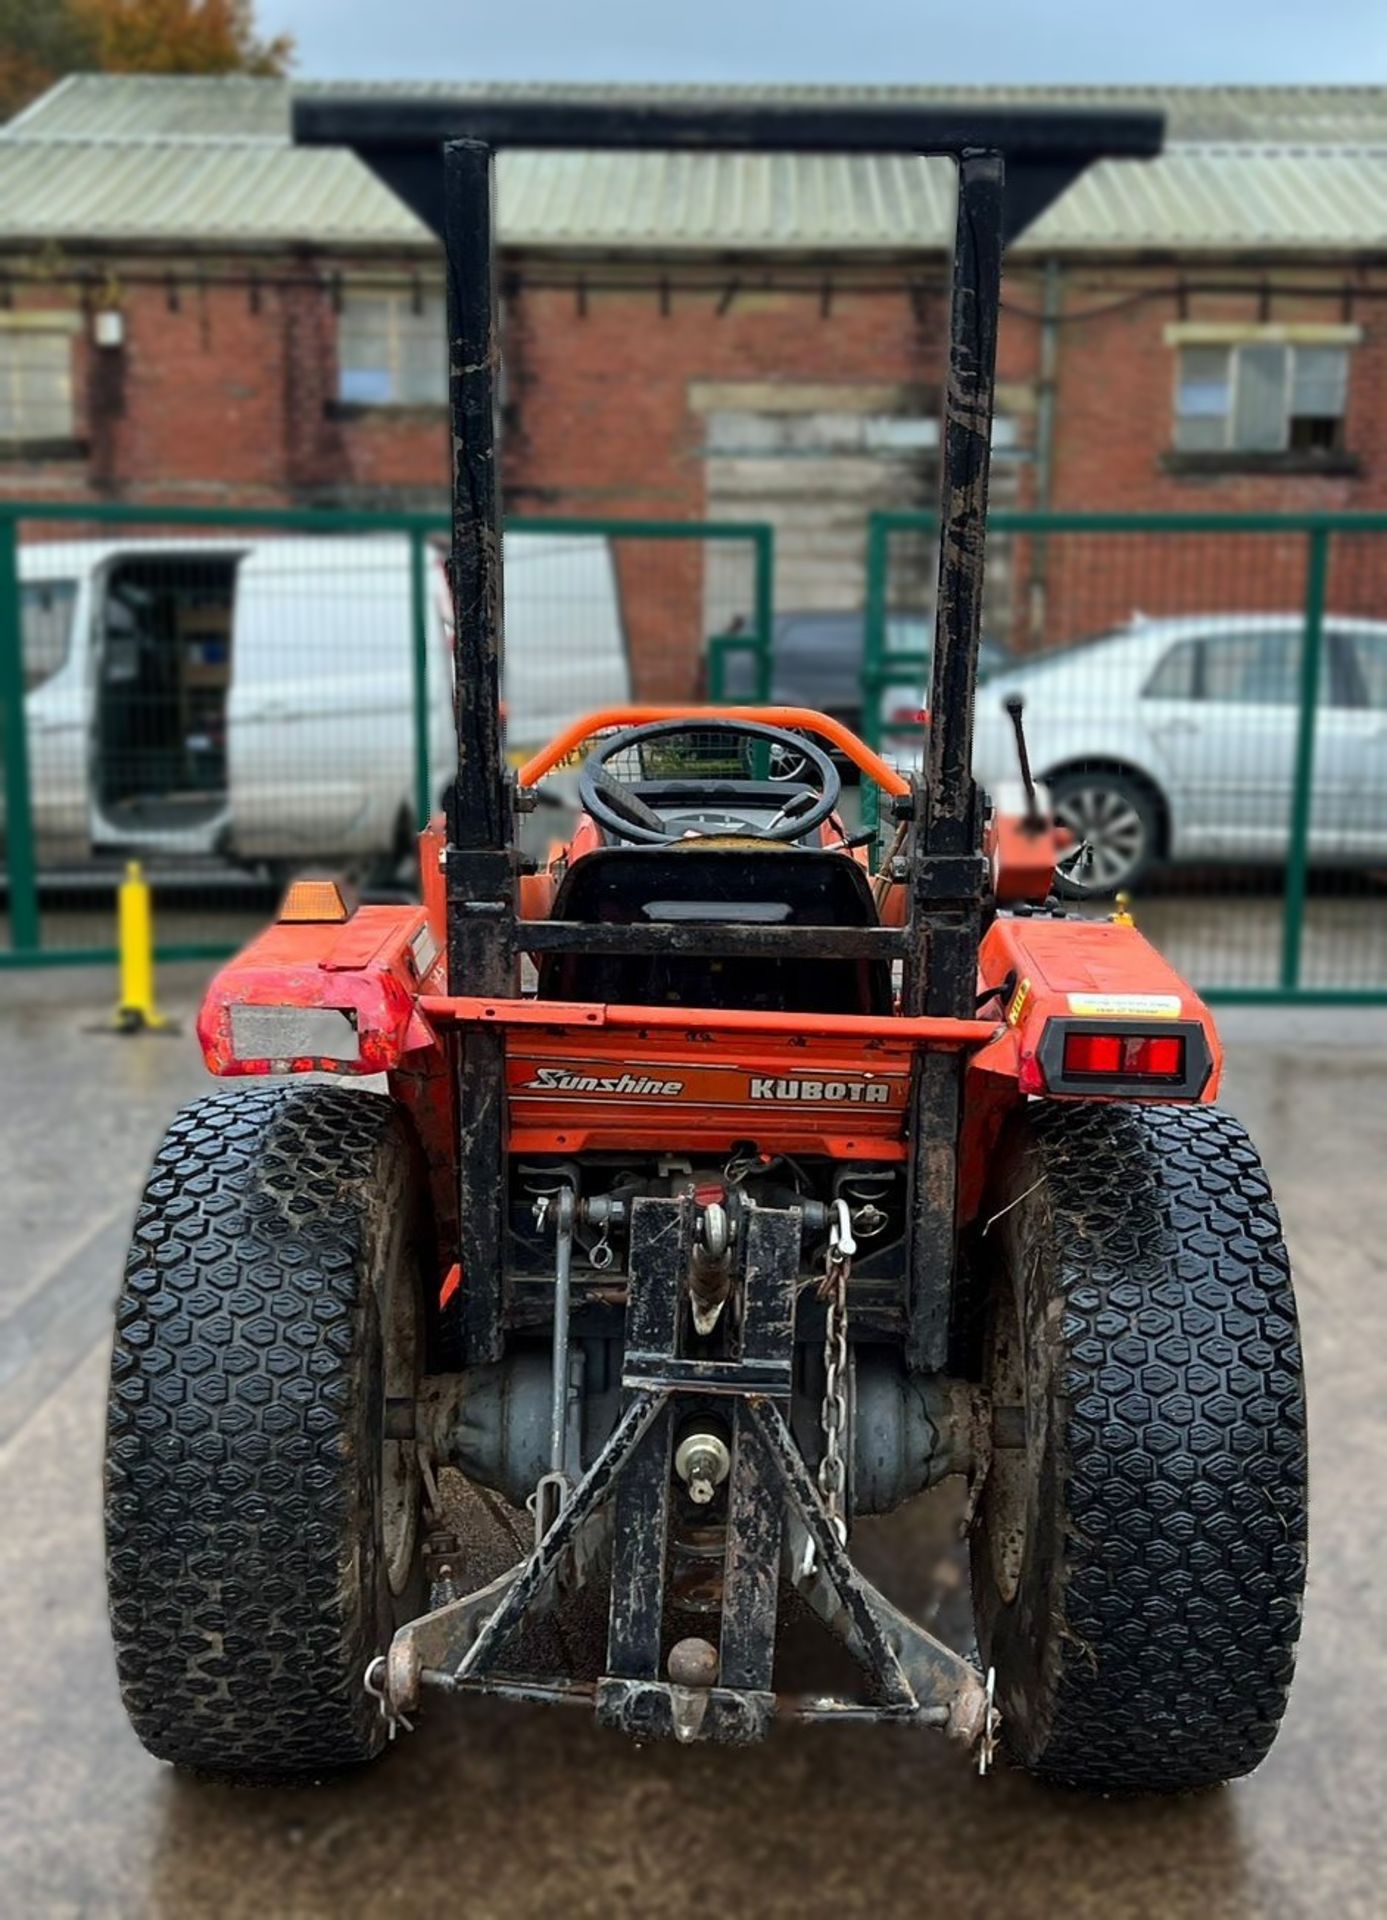 A Kubota Sunshine L1-215 Compact Utility Tractor with Monroematic Auto Controls, 1350mm bucket, - Image 7 of 8